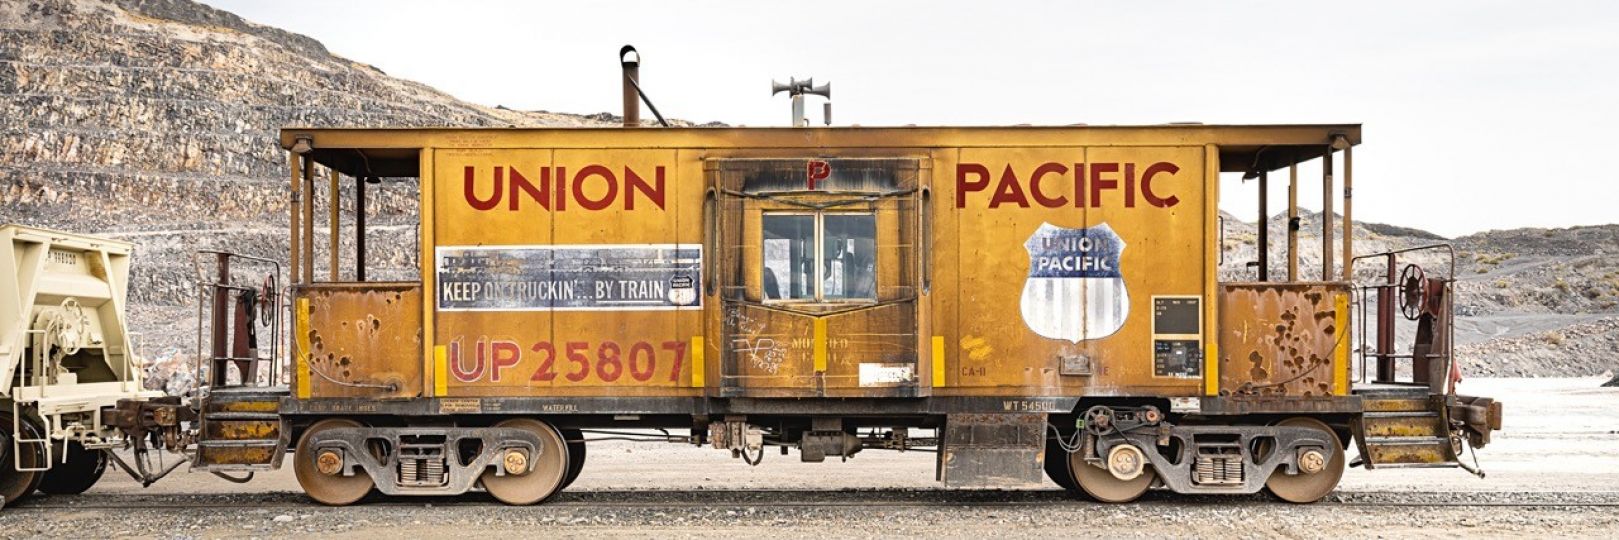 Stephen Mallon, “Caboose UP 25807” Great Salt Lake, UT (available as 10”x30, ed. 10   15”x45”, ed. 10   20”x60”, ed.10 )© Stephen Mallon - Courtesy Front Room Gallery